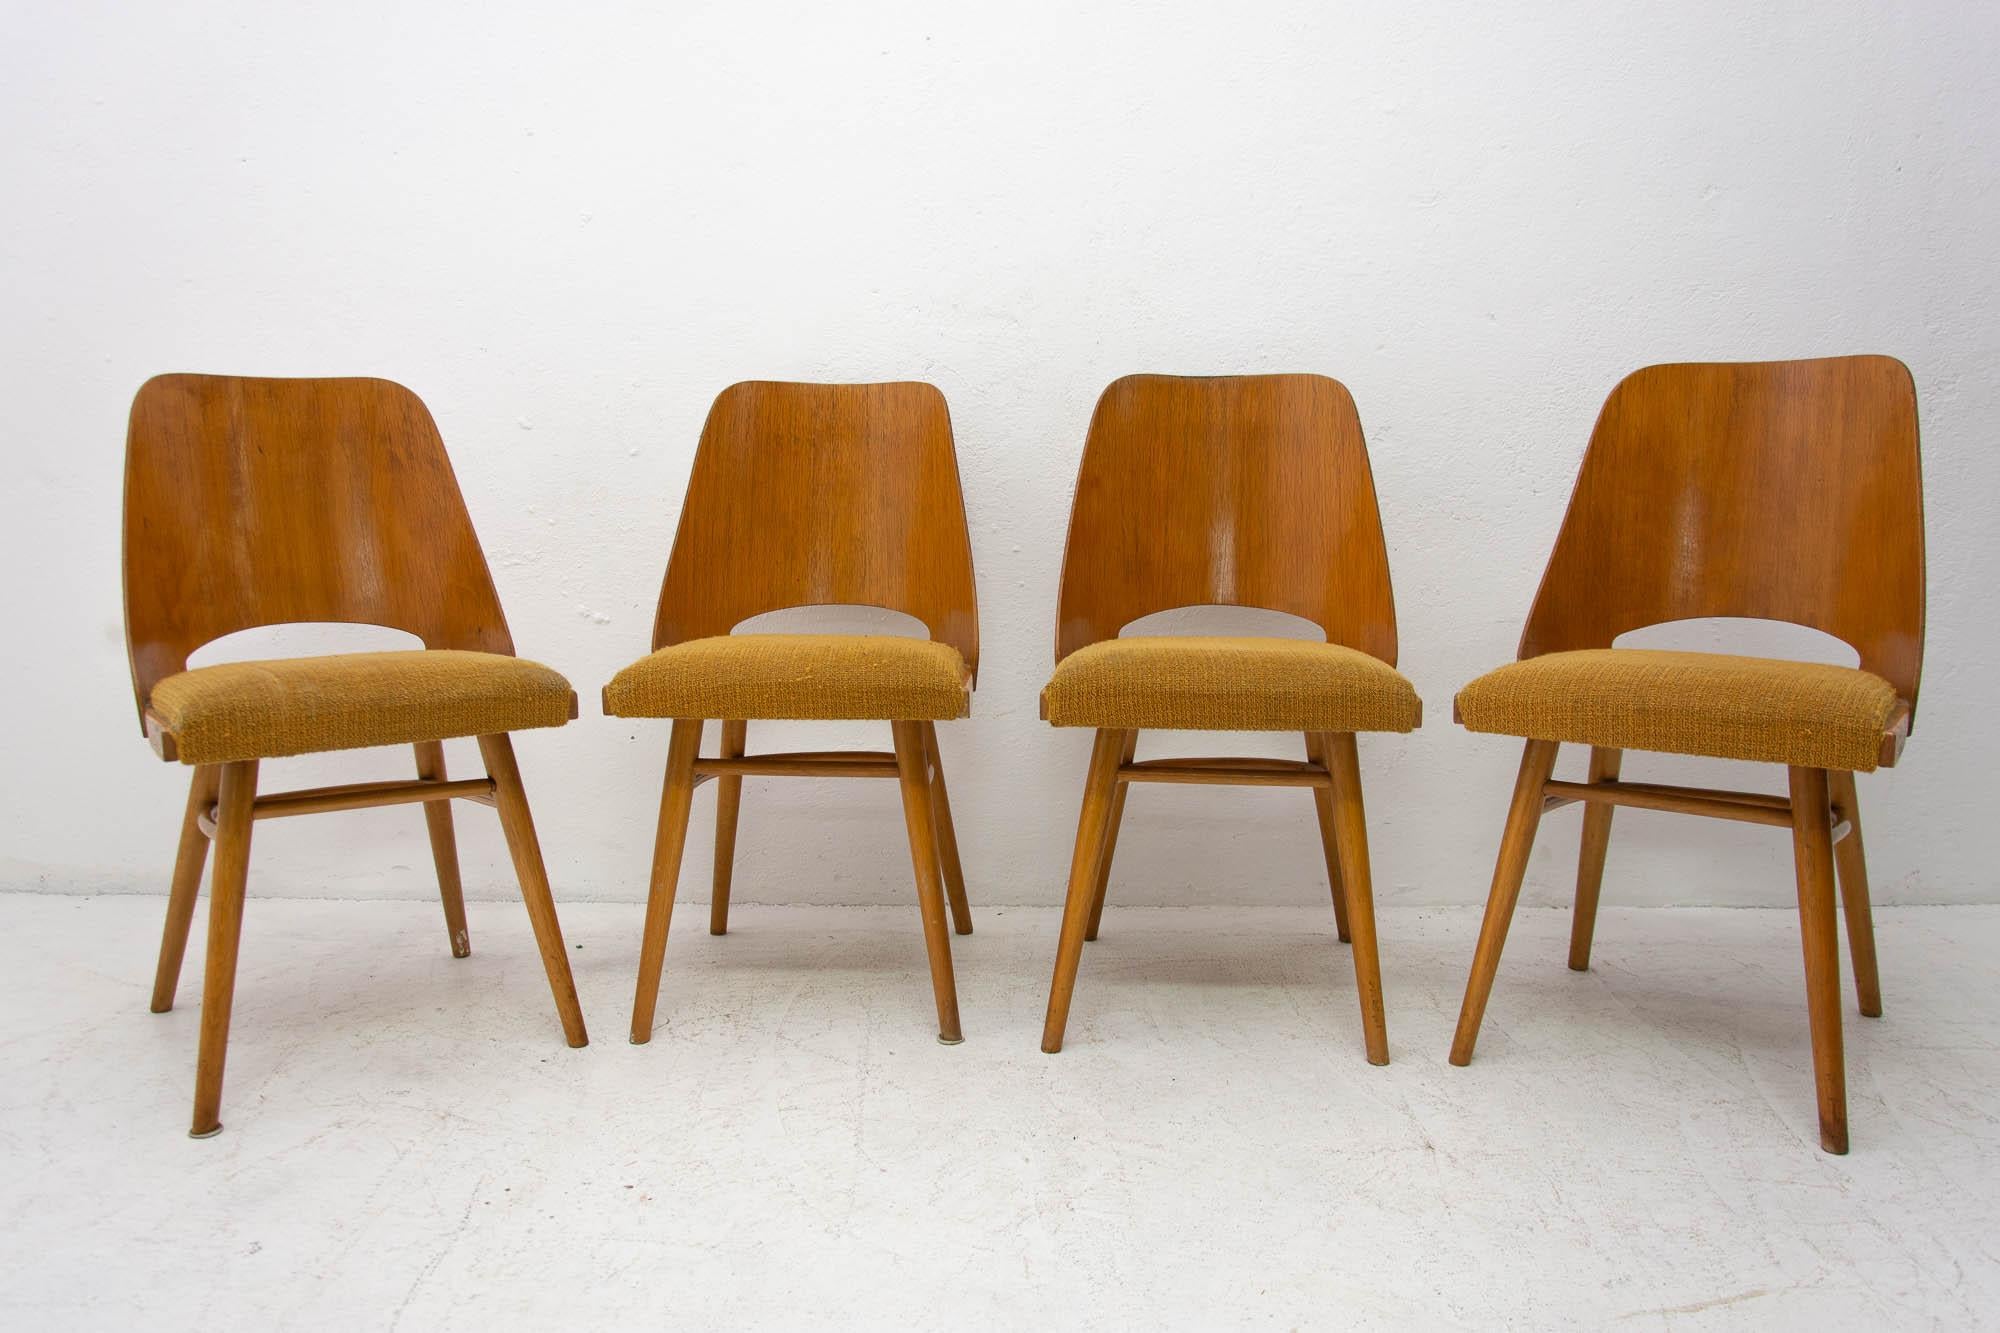 Interesting model of vintage bentwood dining chairs designed by Radomír Hofman for TON Bystrice pod Hostýnem (Thonet successor in Czechoslovakia after World War 2) . They were made in the former Czechoslovakia in the 1960´s. The chairs are made of